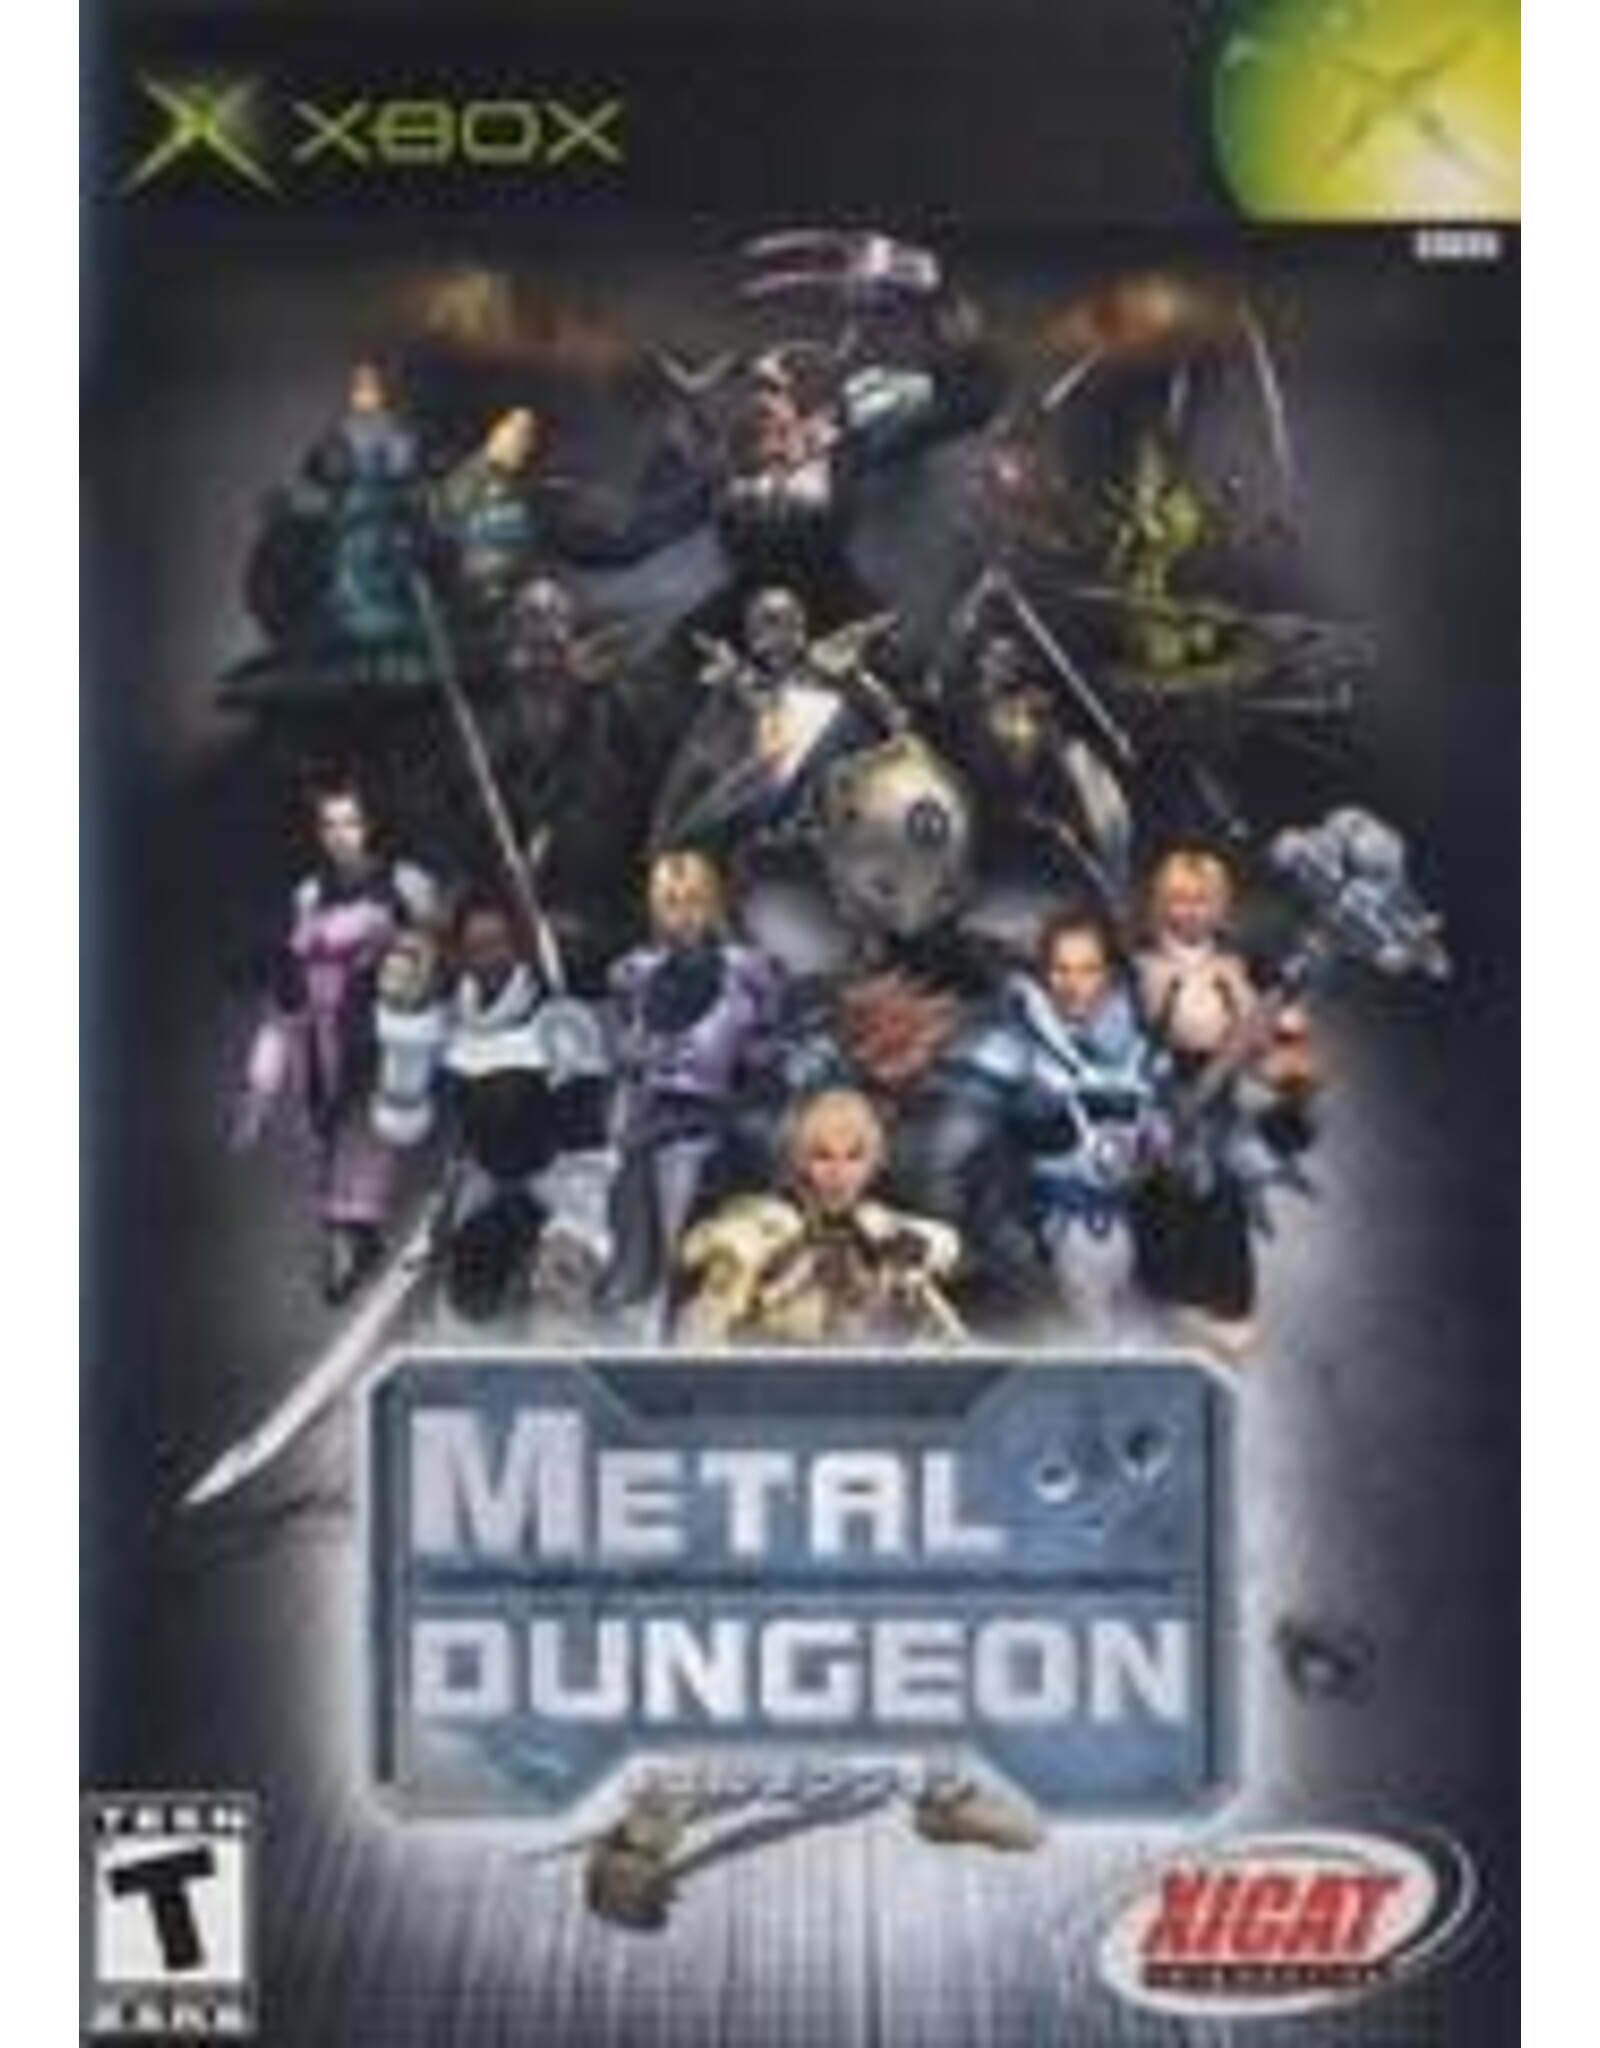 Xbox Metal Dungeon (Used, No Manual)